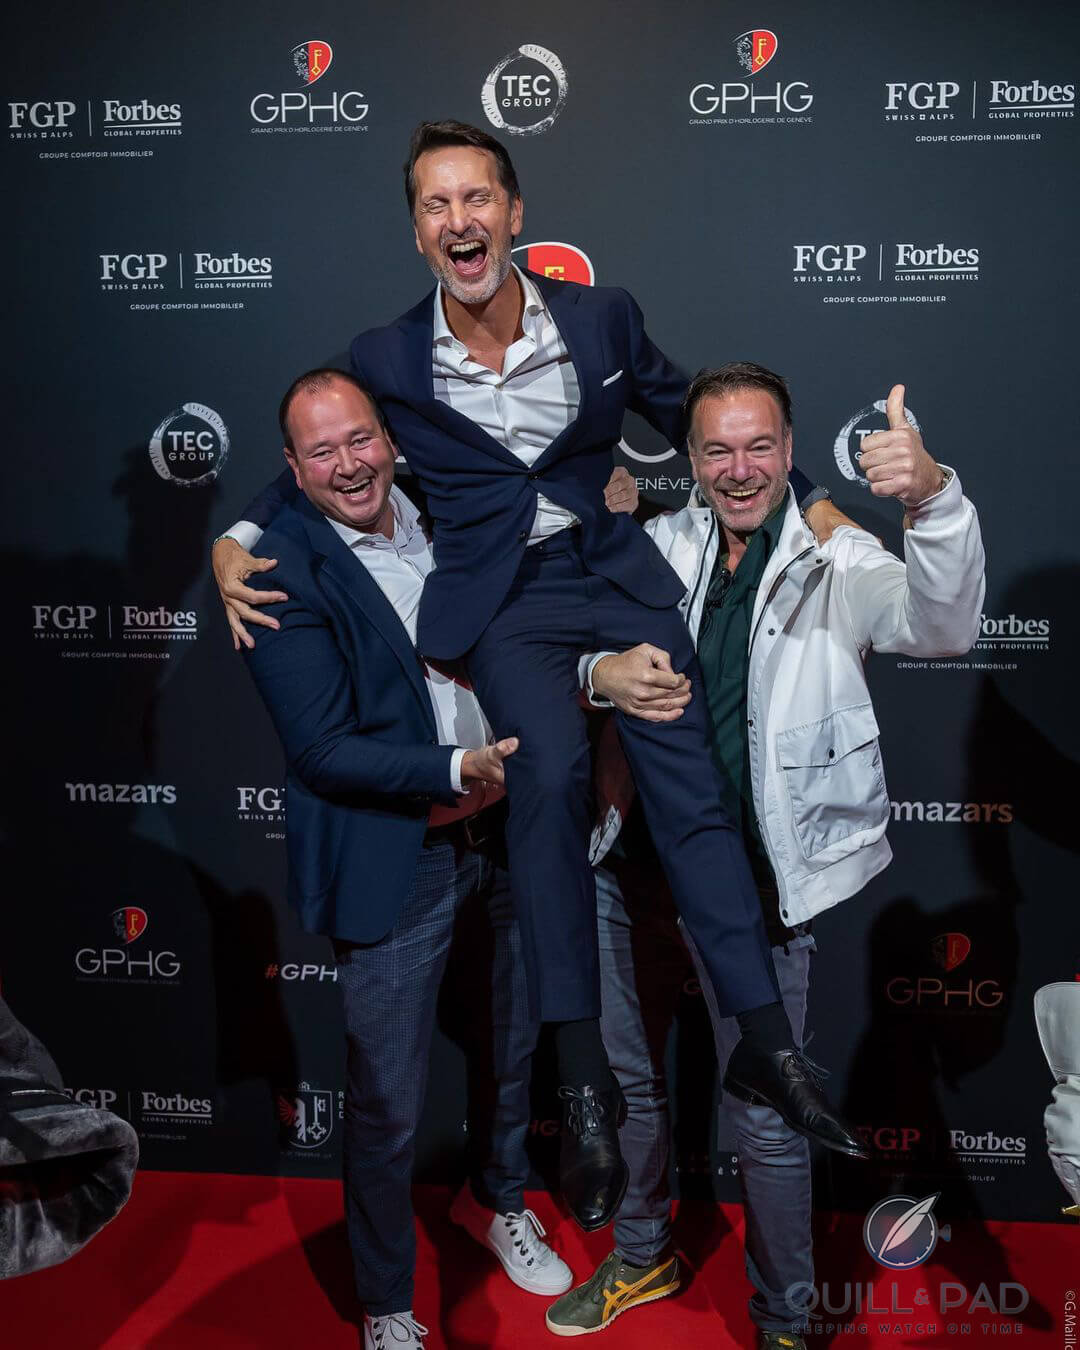 Louis Vuitton, Rolex and Tag Heuer at 2022 Monaco Grand Prix highlight how  luxury brands and sports have never been closer